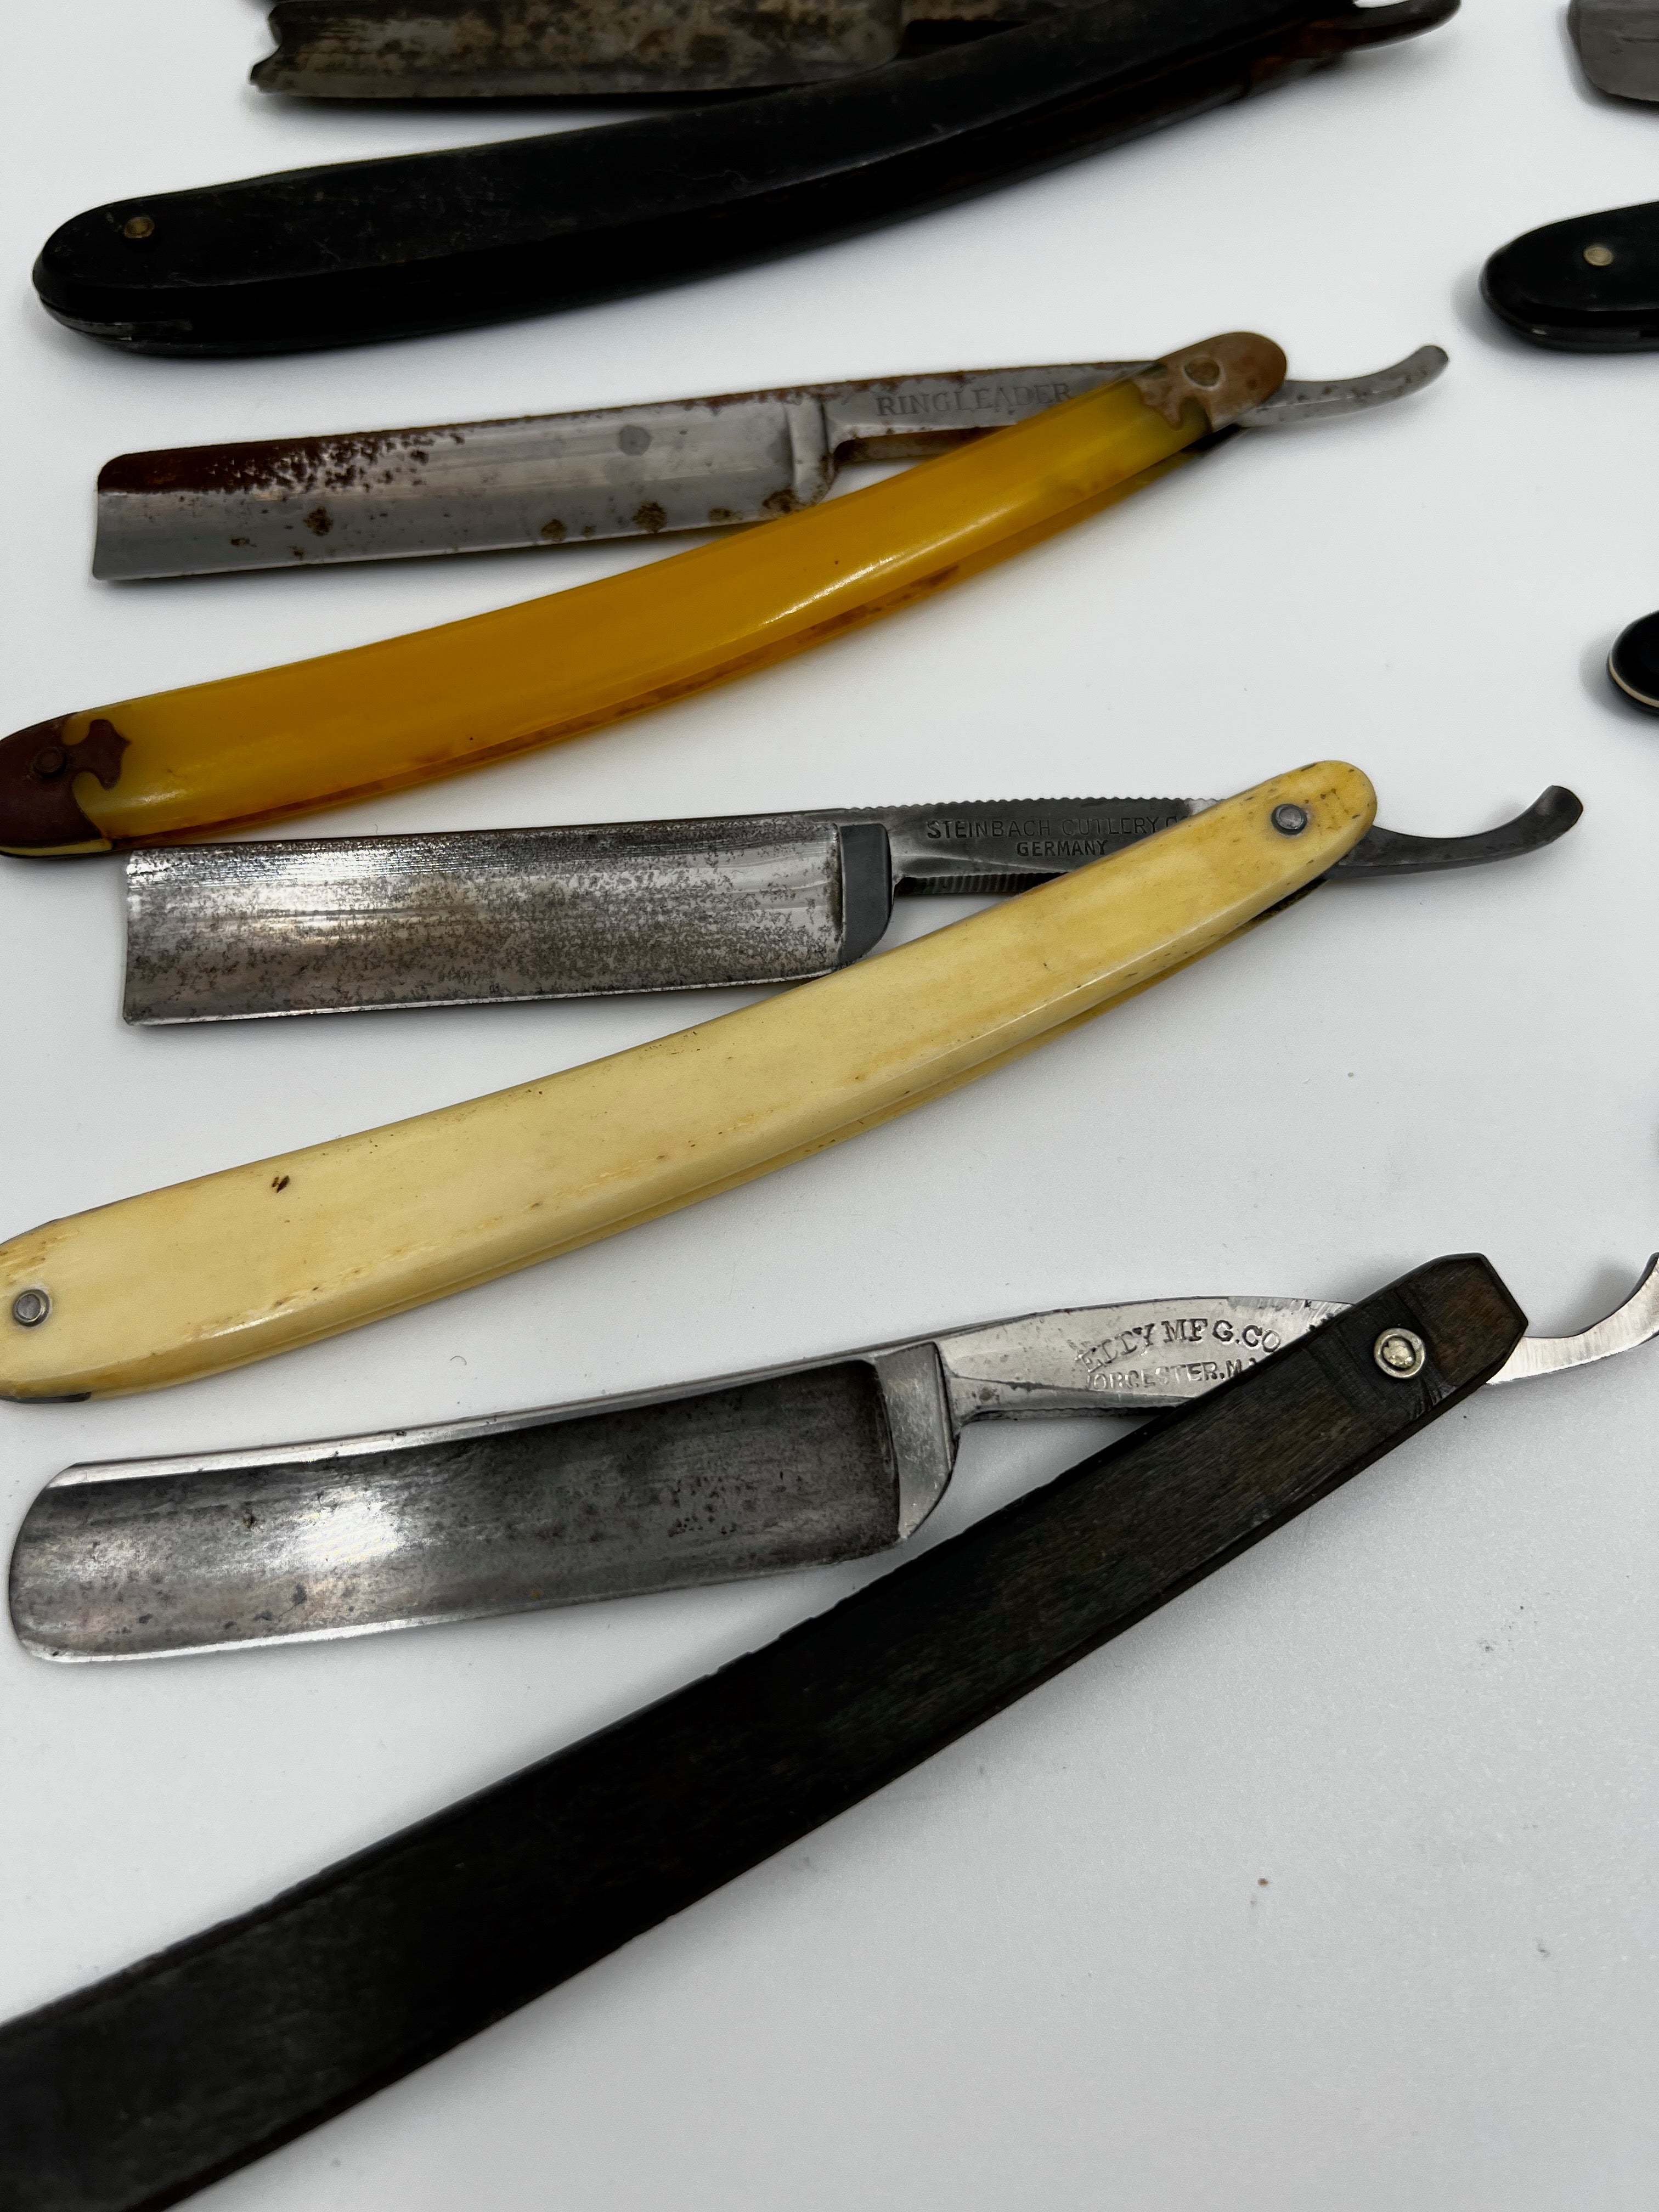 Vintage 10 Straight Razor Lot #9 - May Contain Sheffield, Solingen, Japanese & USA makers, as pictured